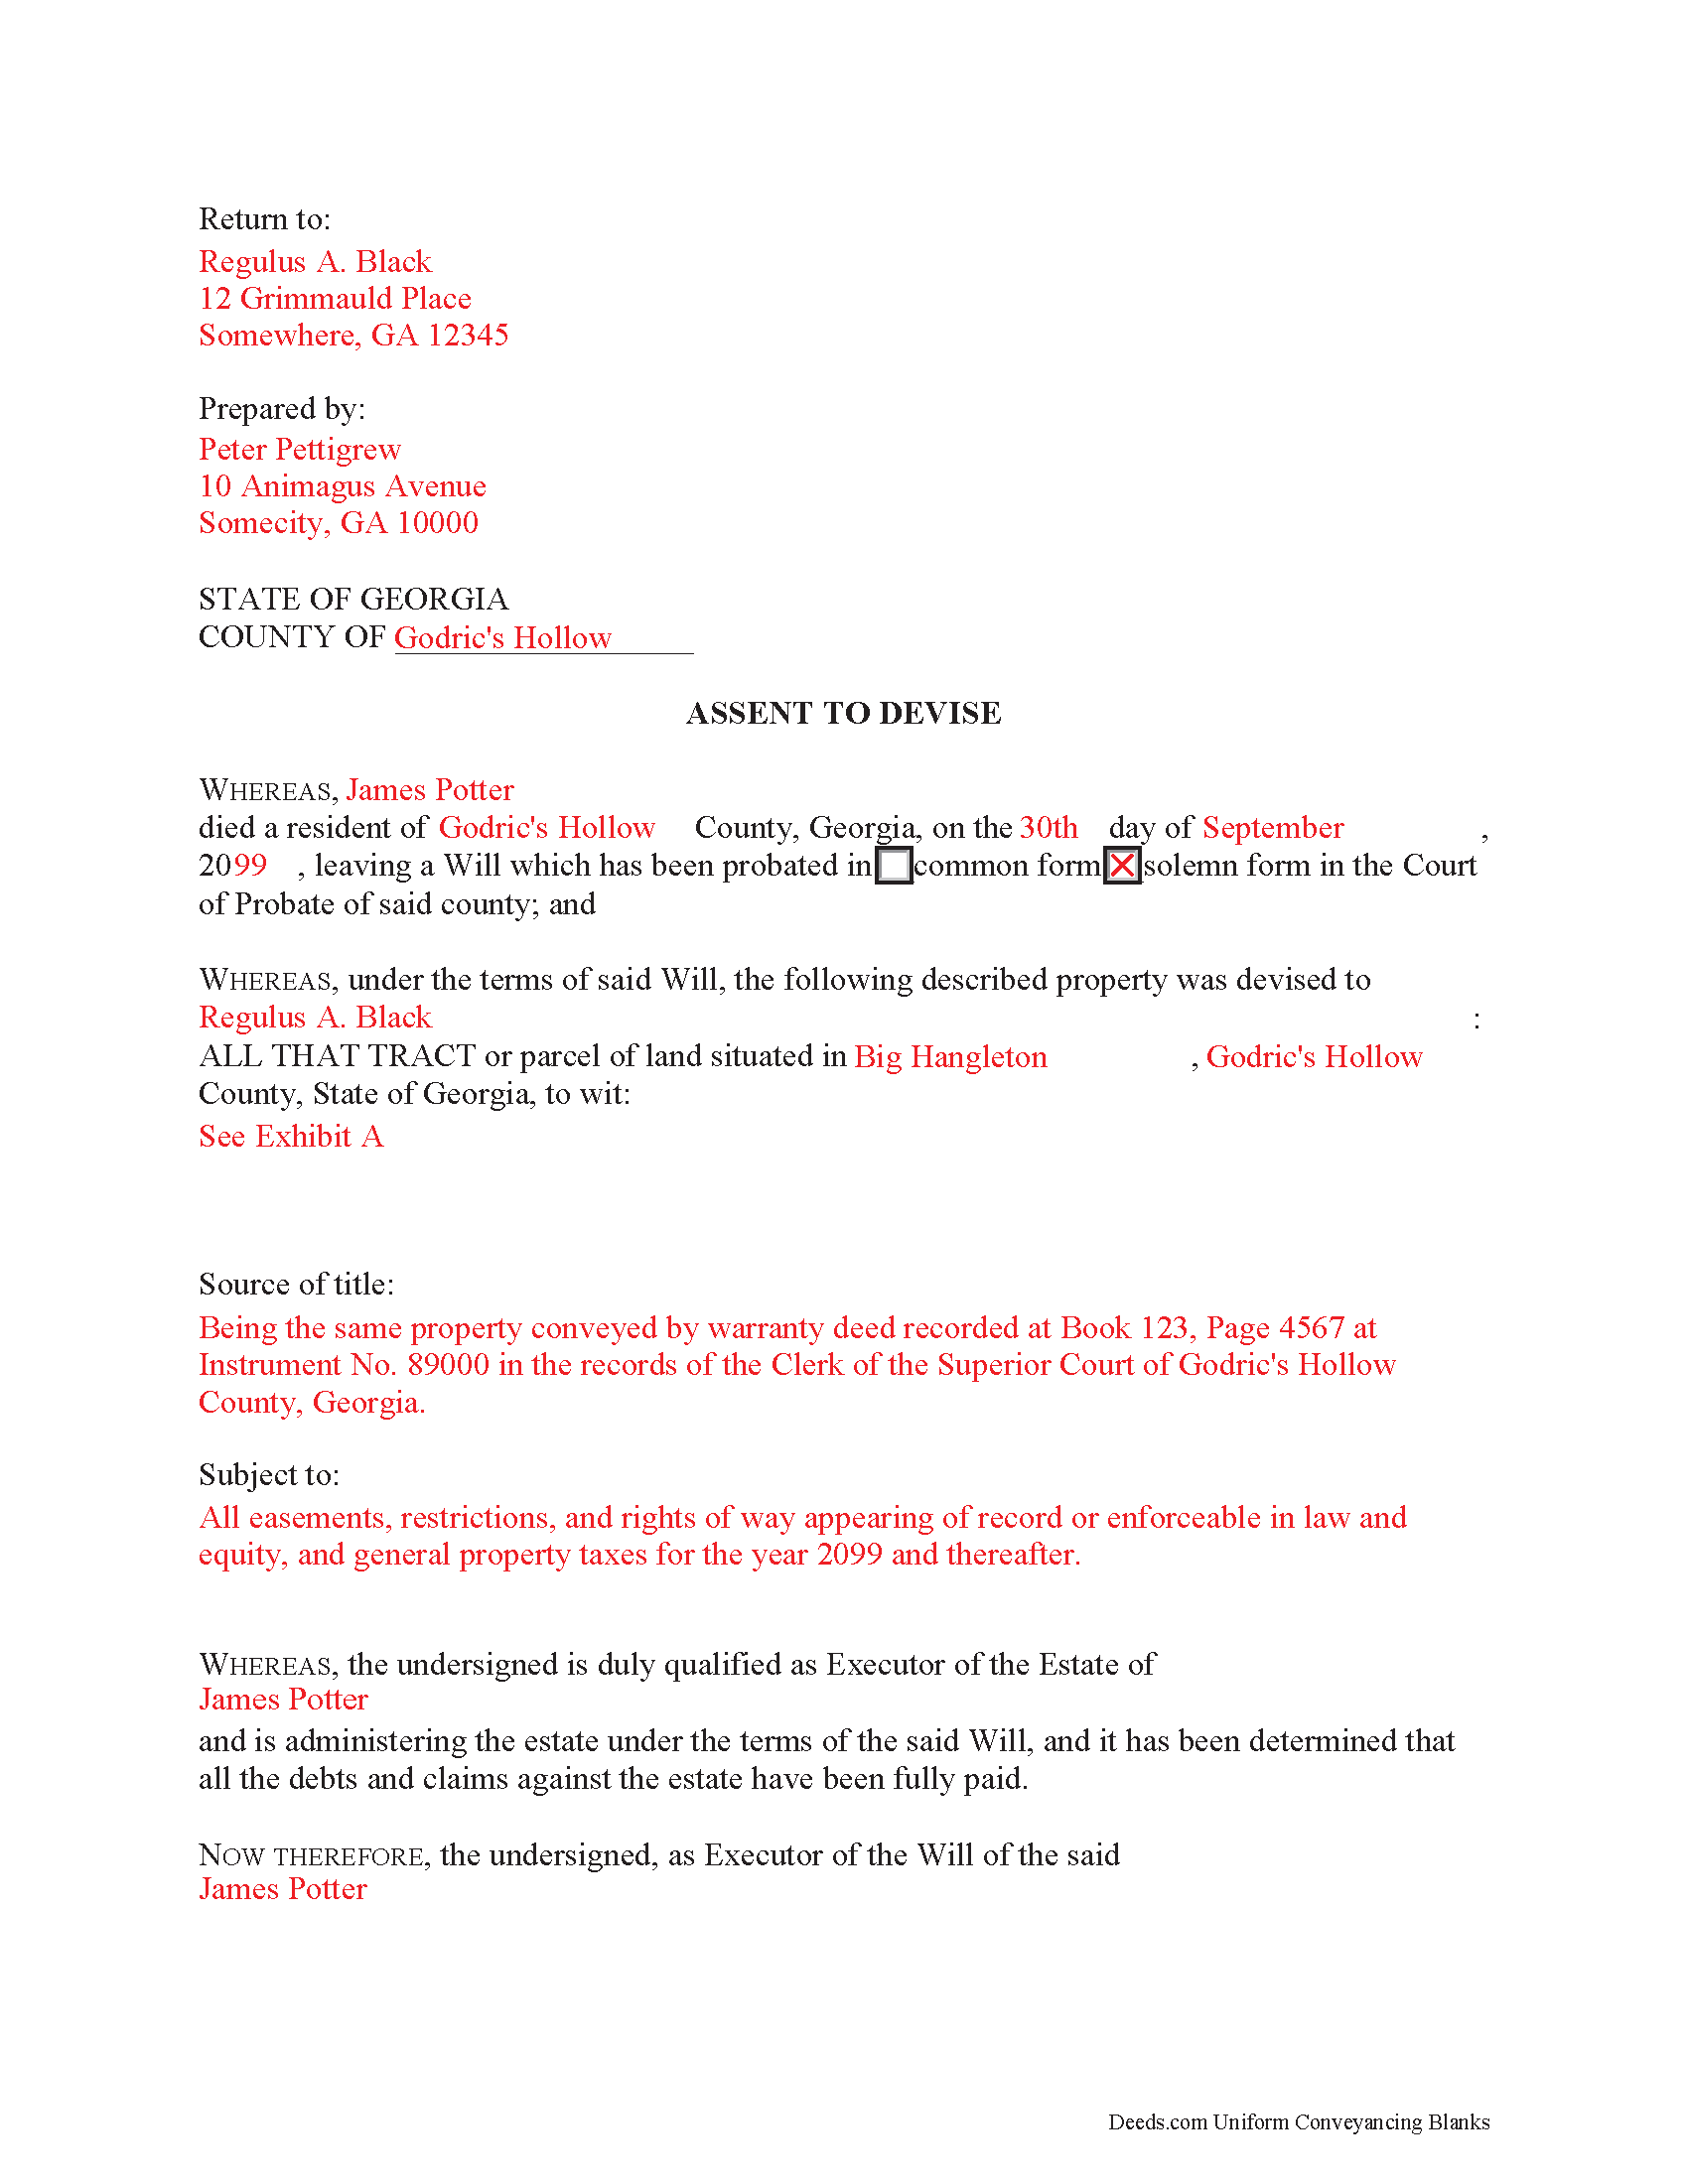 Completed Example of the Assent to Devise Document